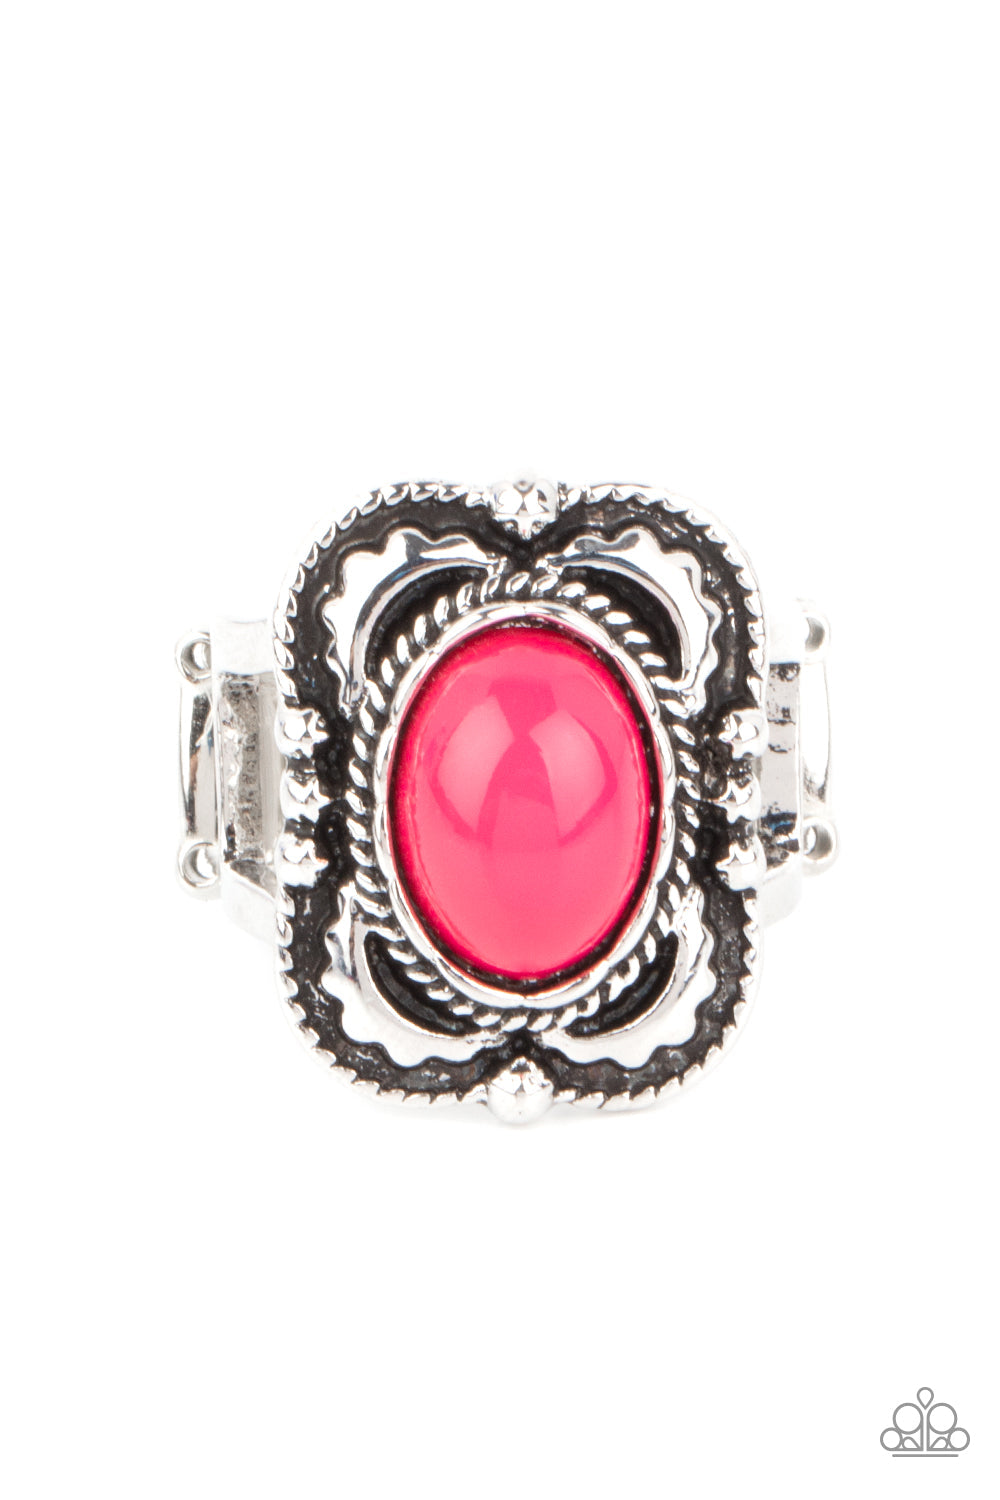 PRE-ORDER - Paparazzi Vivaciously Vibrant - Pink - Ring - $5 Jewelry with Ashley Swint